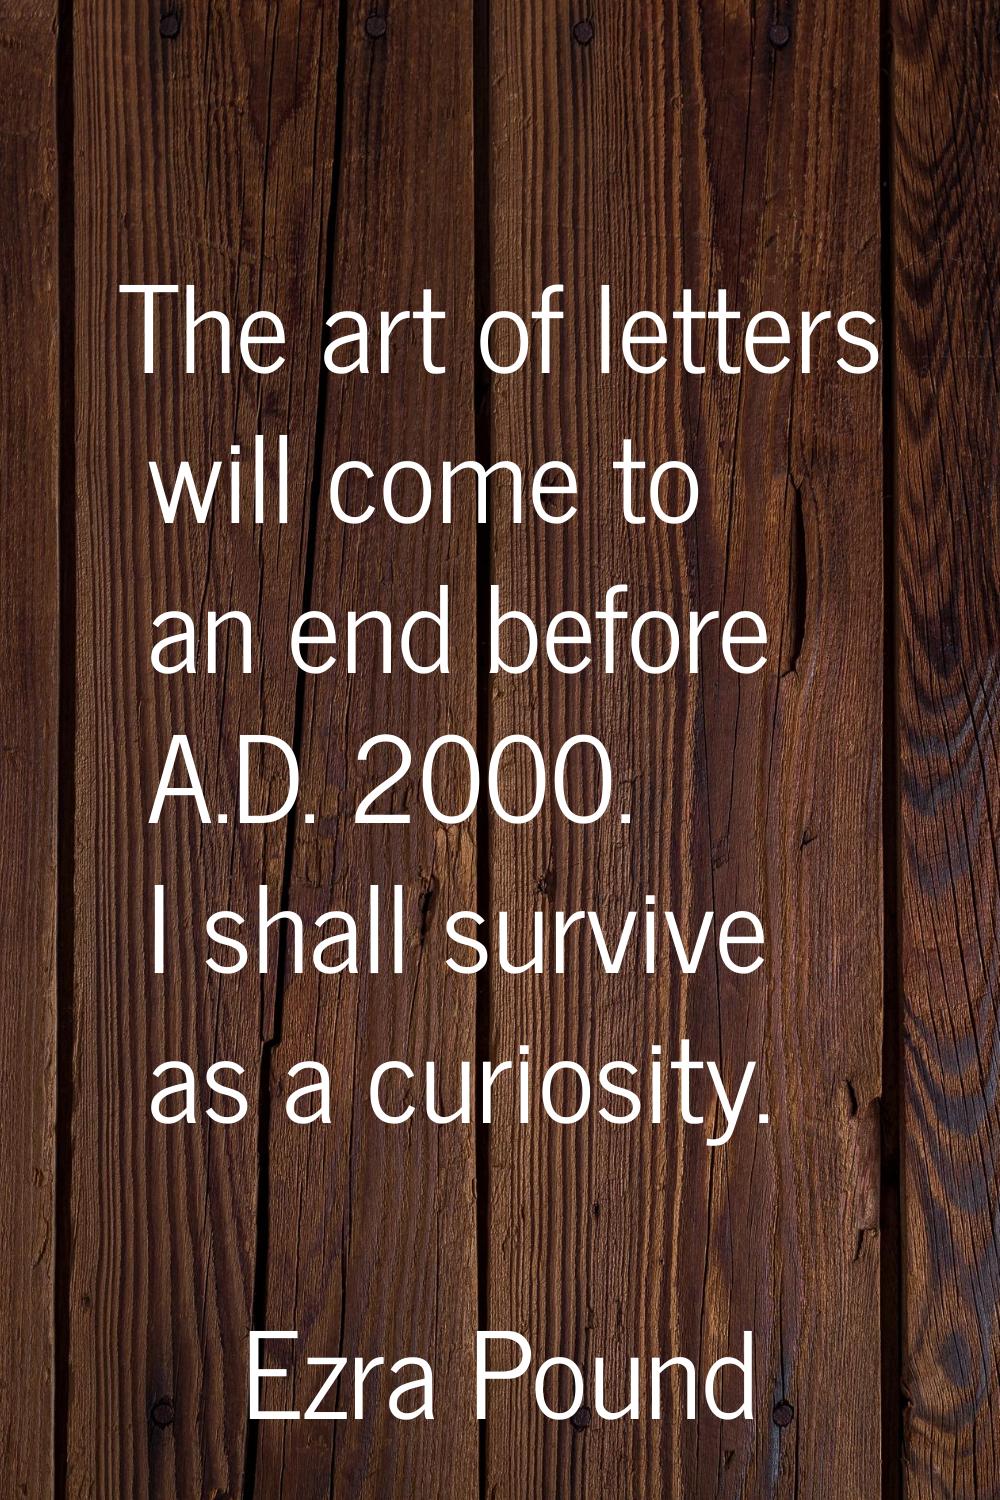 The art of letters will come to an end before A.D. 2000. I shall survive as a curiosity.